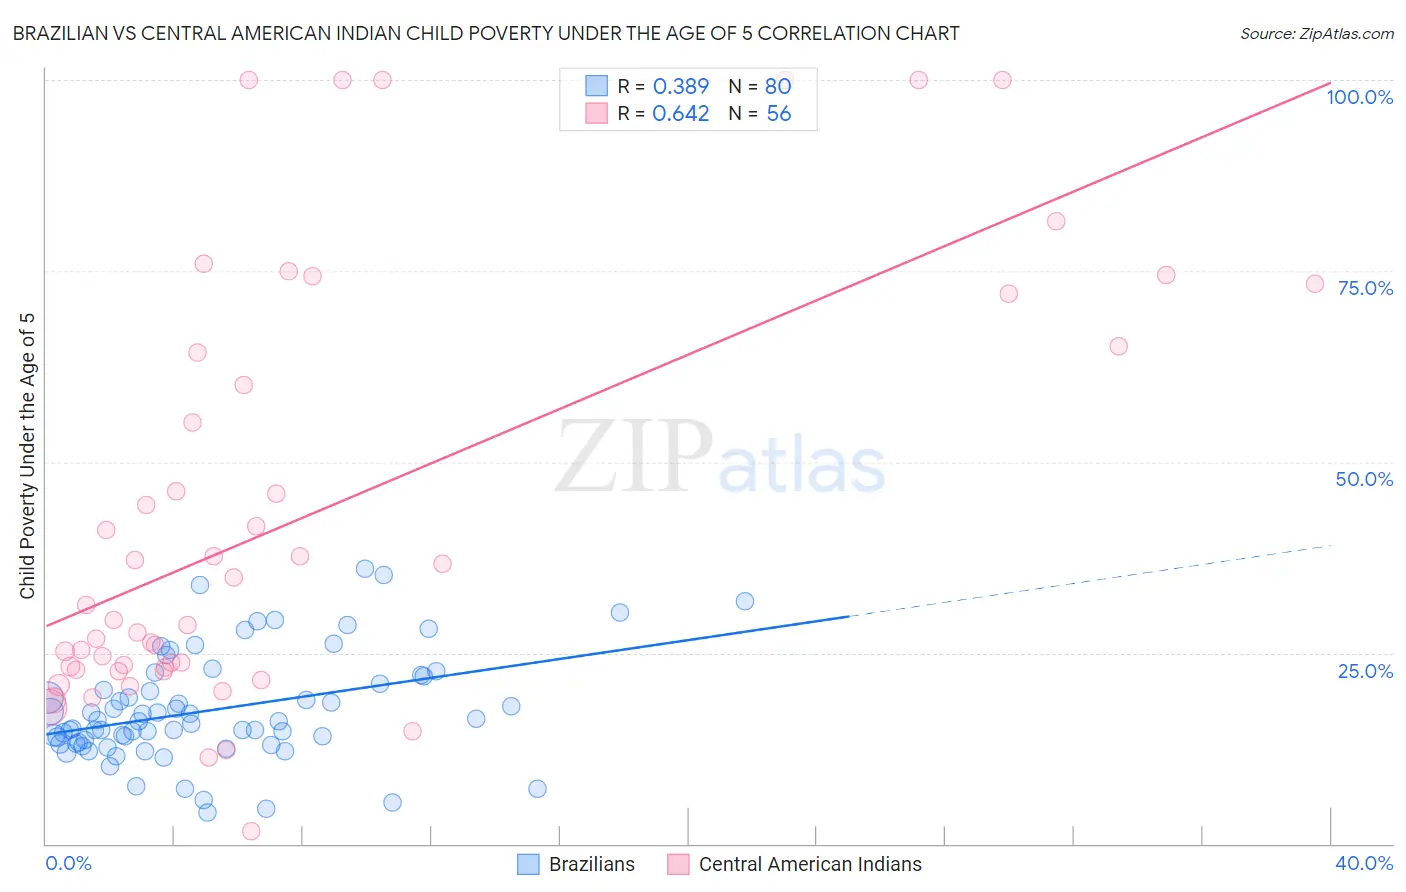 Brazilian vs Central American Indian Child Poverty Under the Age of 5